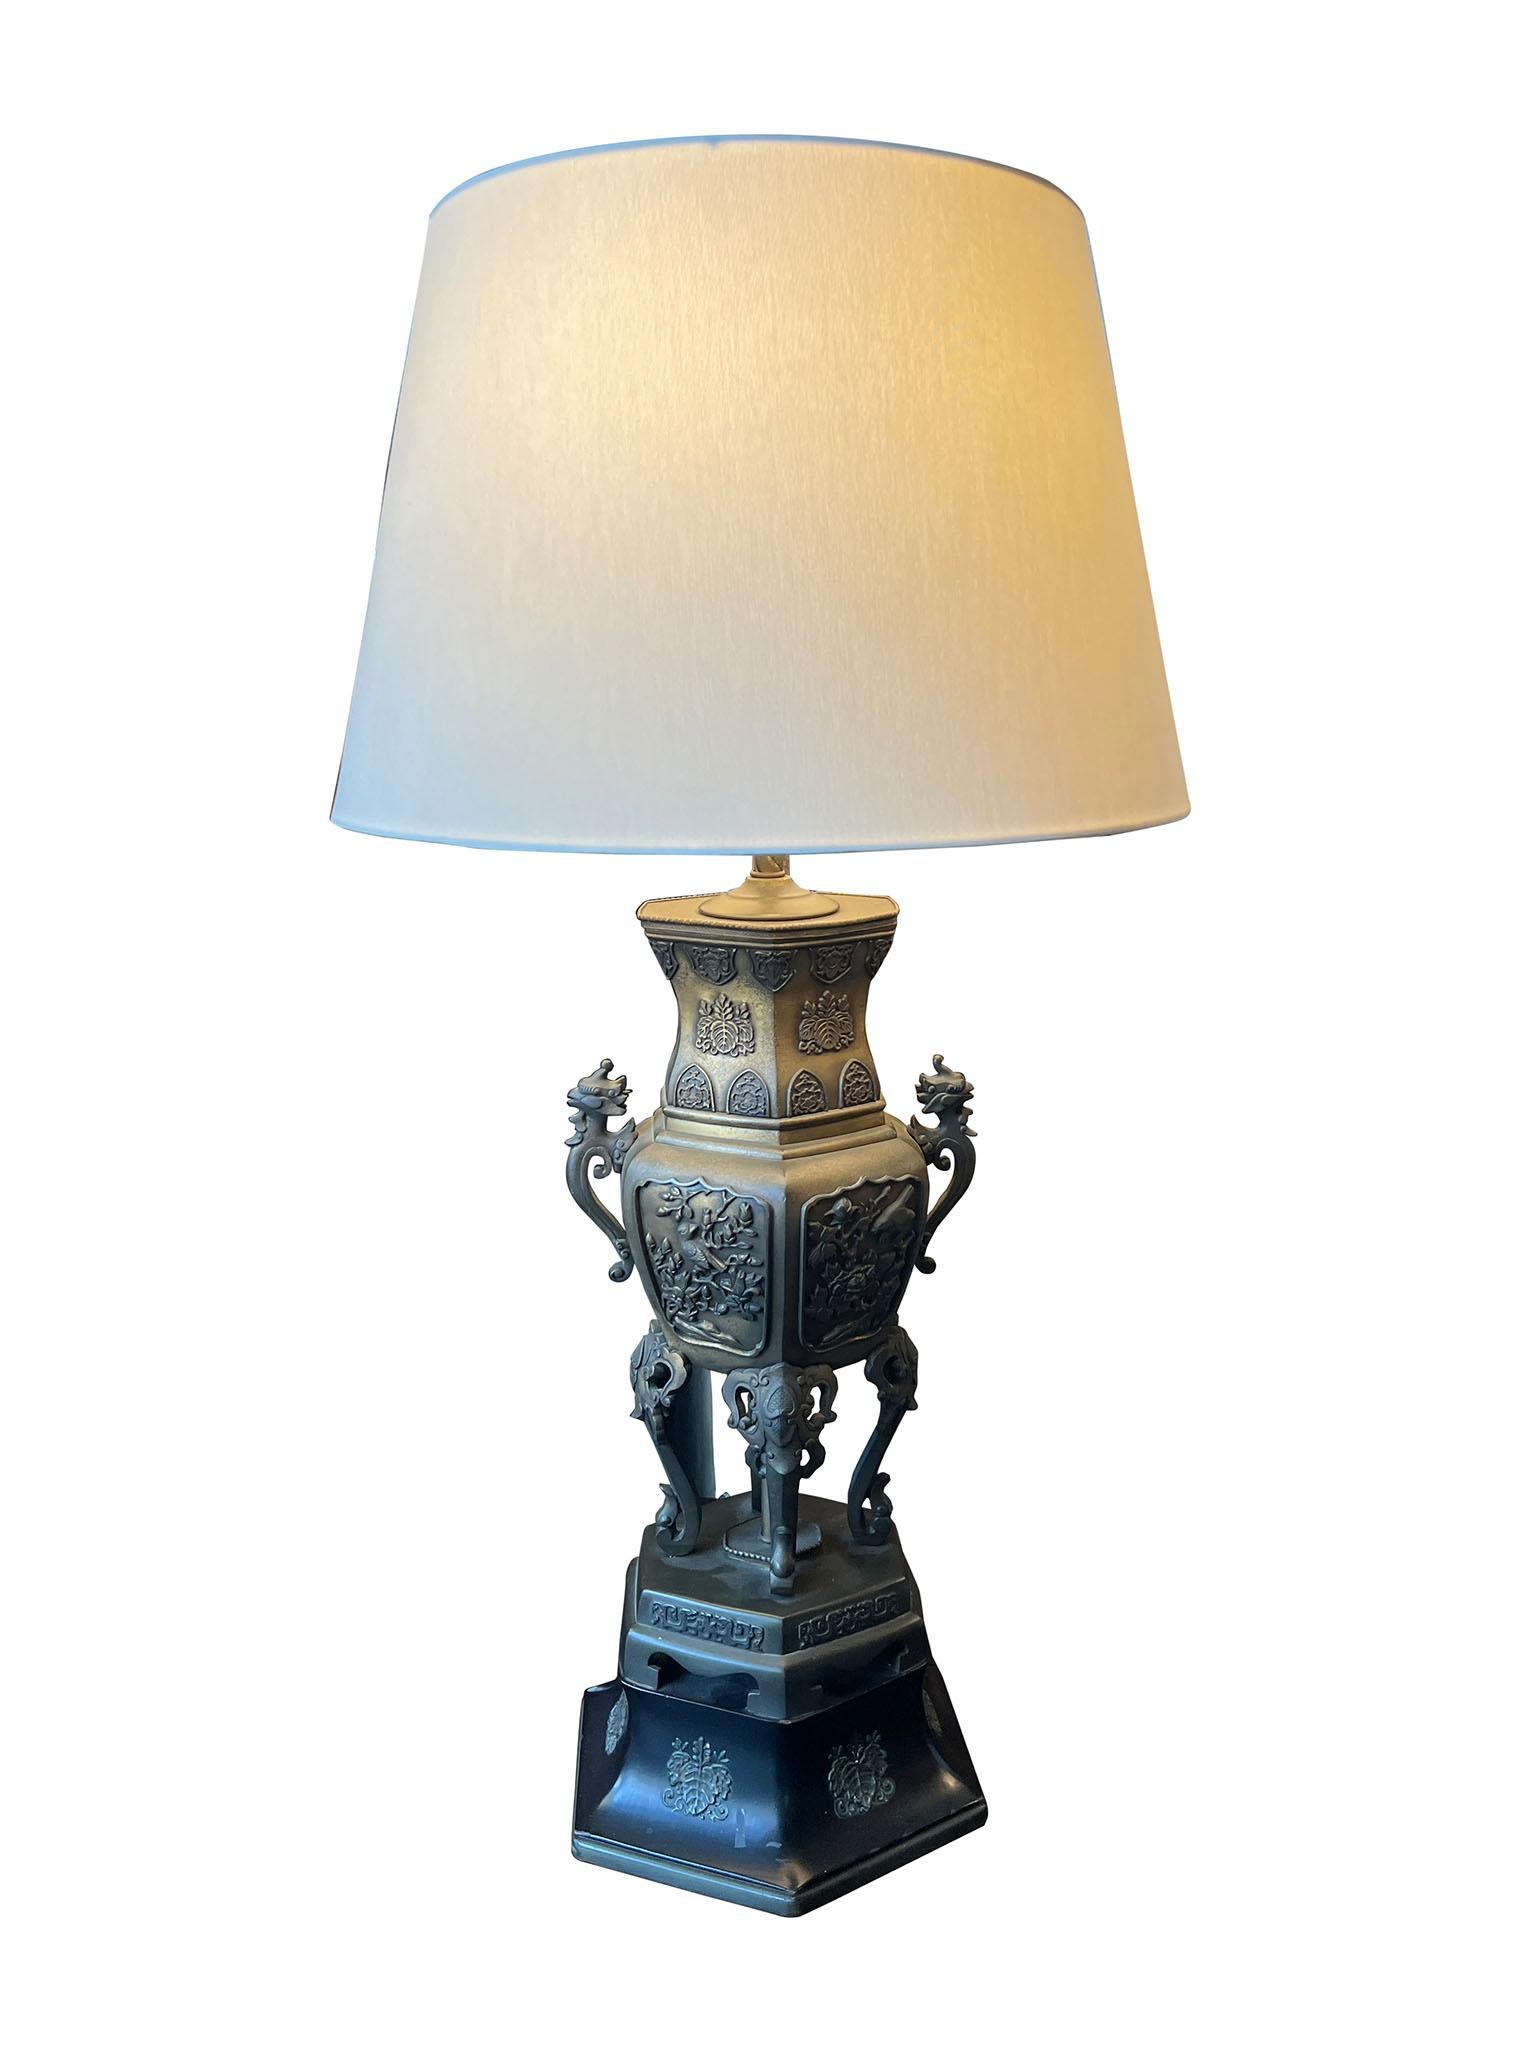 Chinese Export Pair of Chinese Bronze Table Lamps in the Style of James Mont For Sale